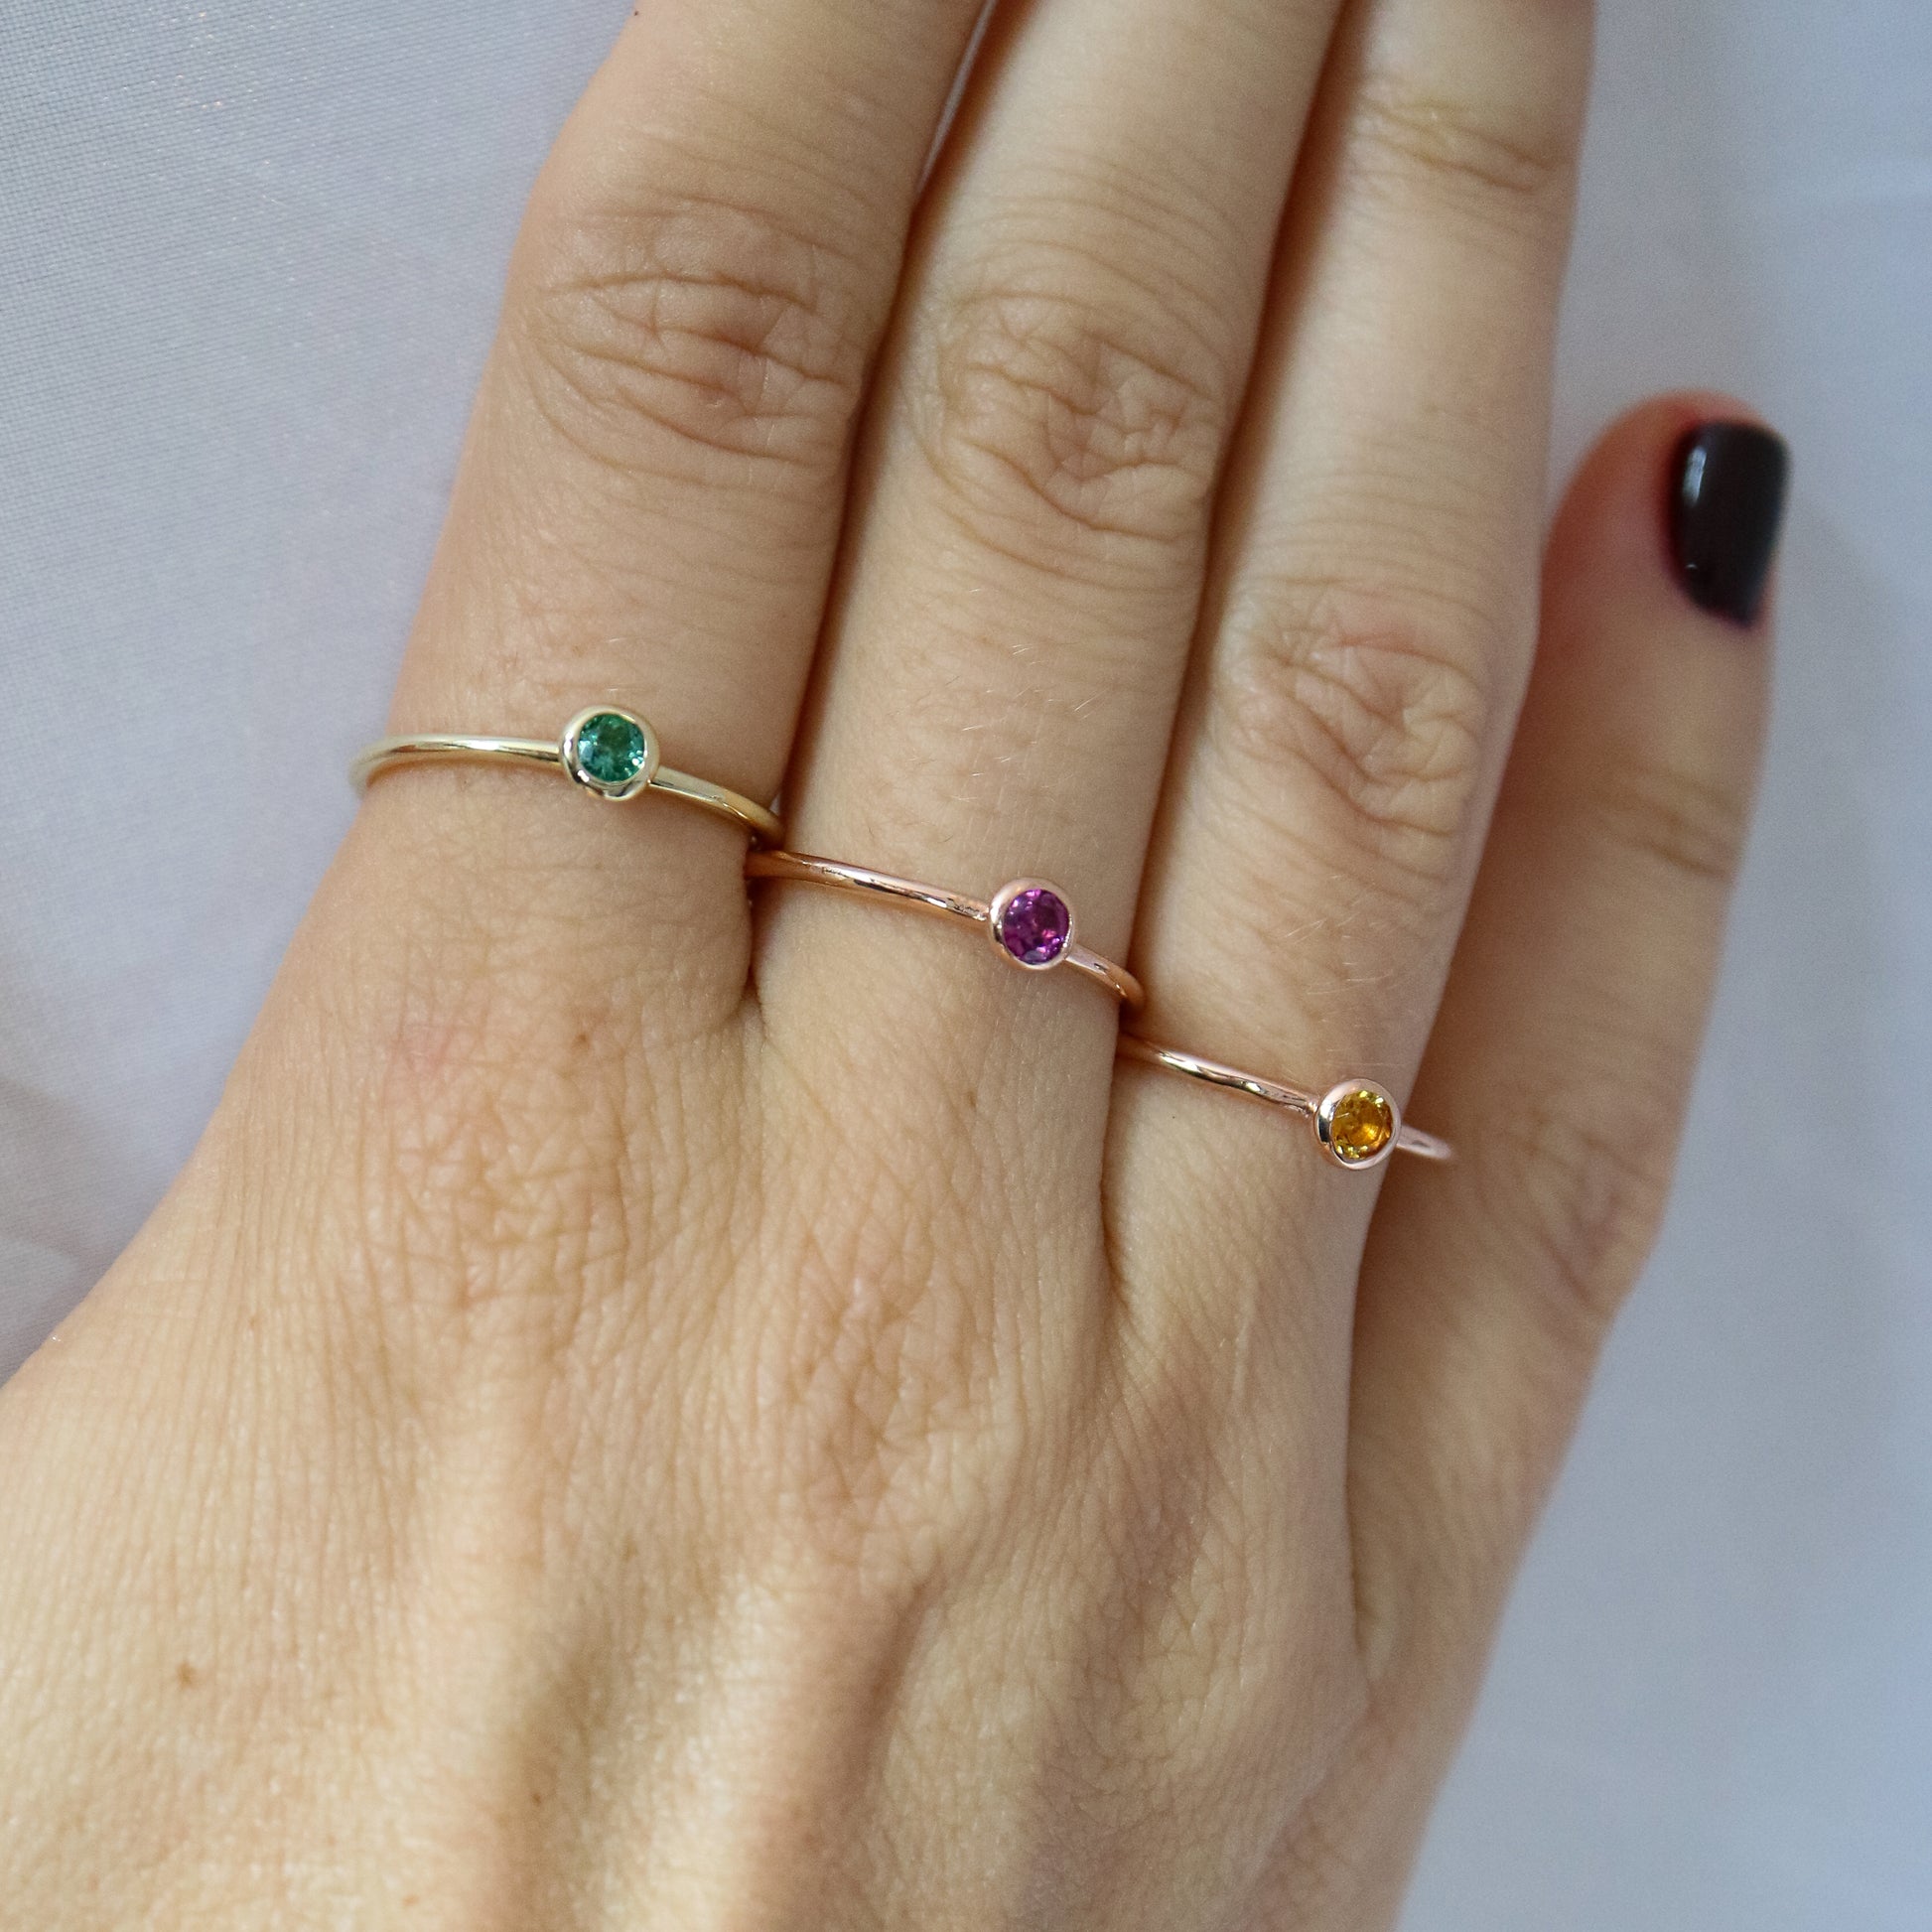 9ct stacking rings with colourful gems